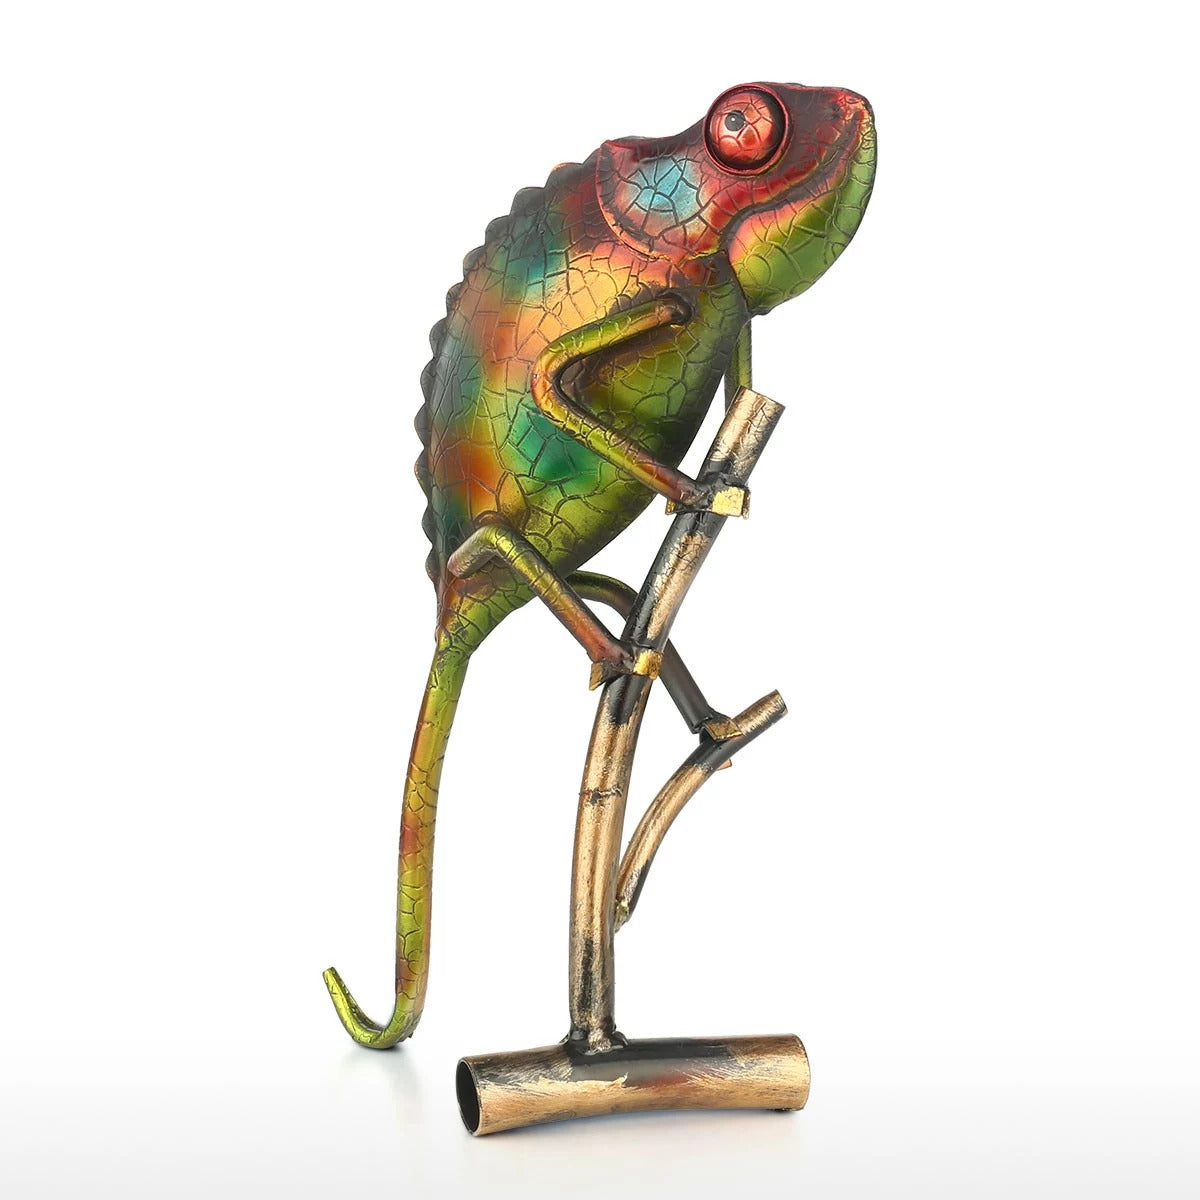 Small Lizard Statue as Ornaments and Home Decor